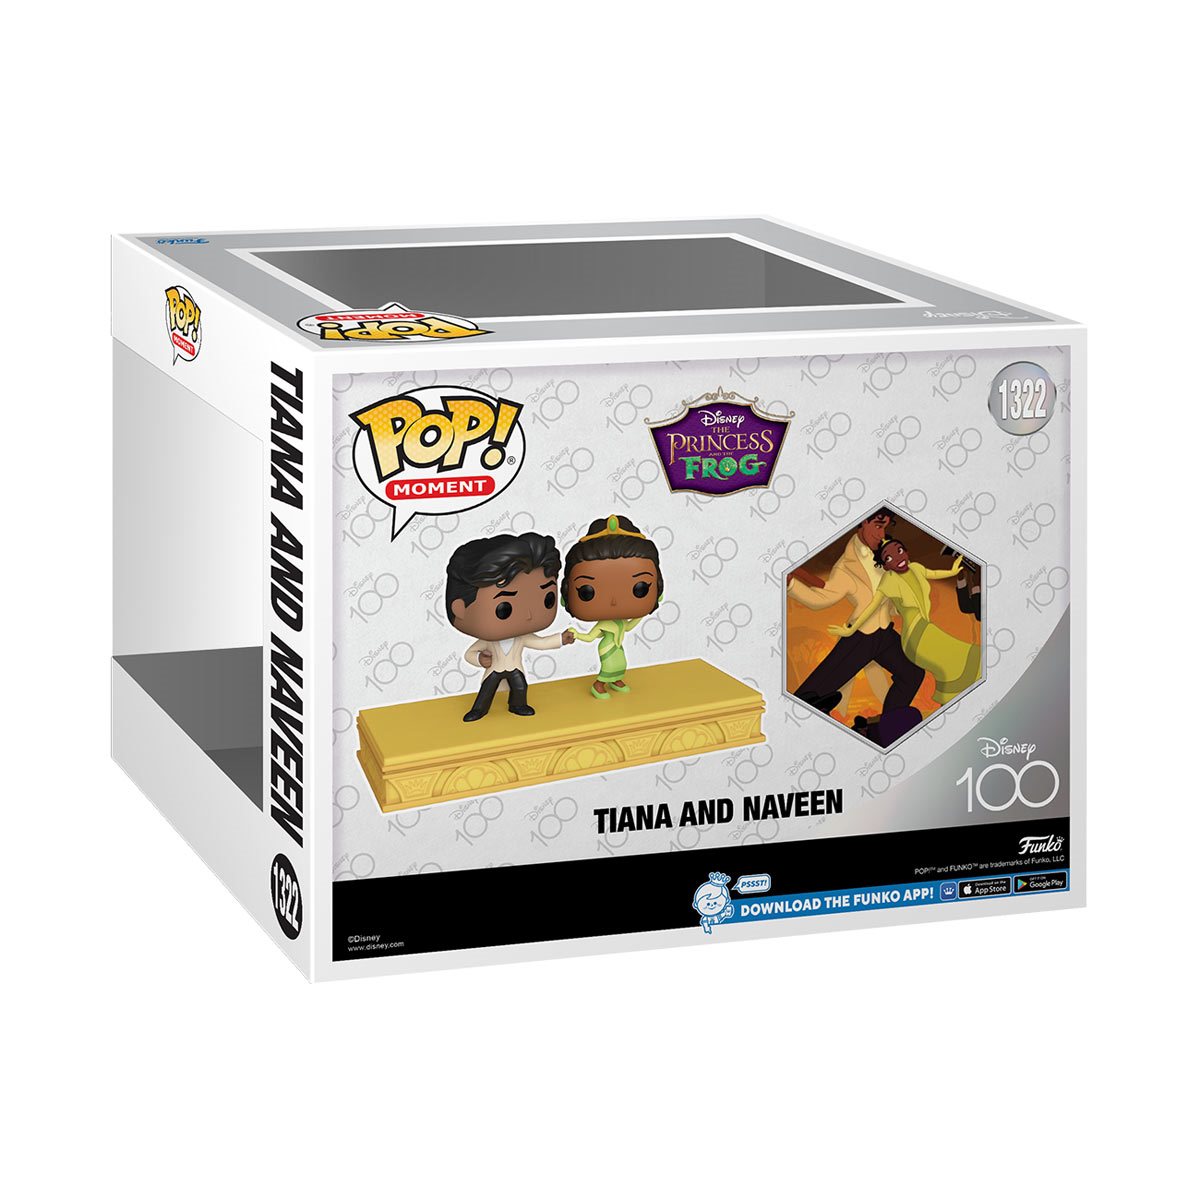 Disney The Princess and the Frog Tiana with Gumbo Exclusive Pop! Vinyl  Figure